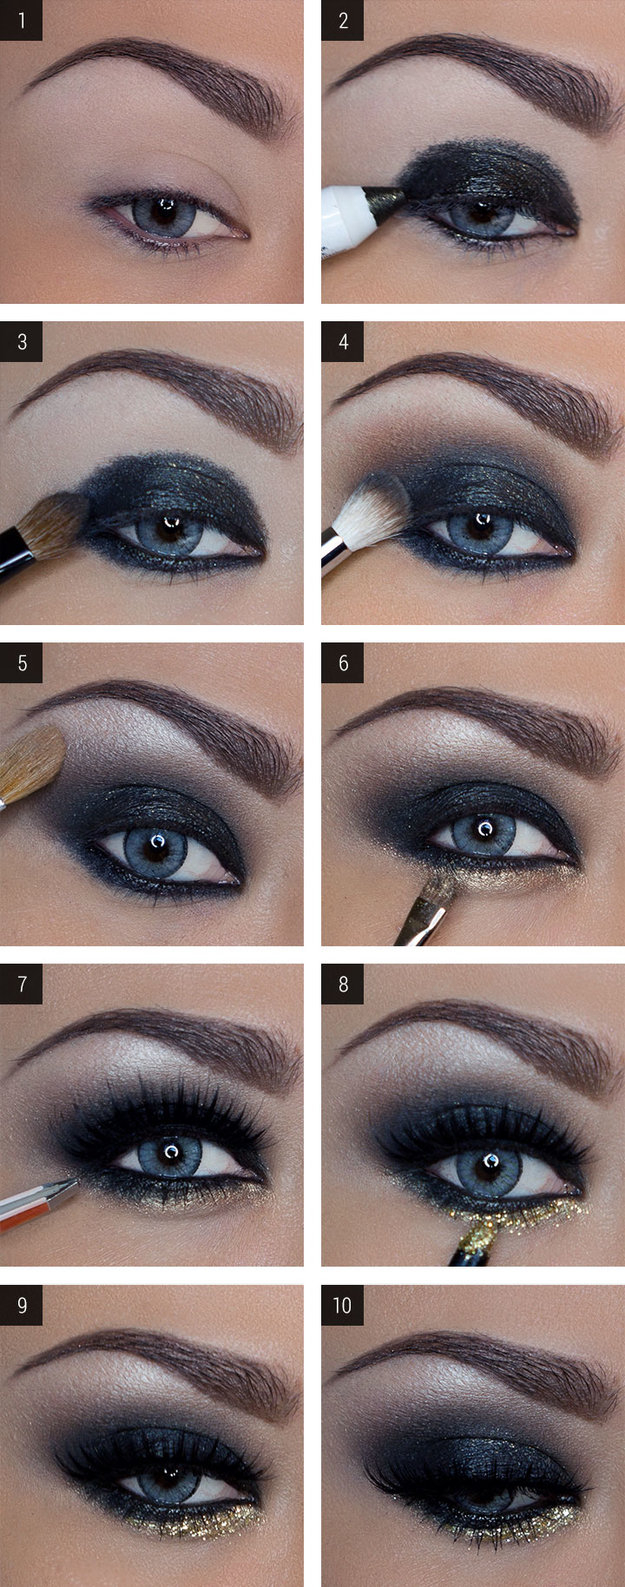 Best Way To Do Makeup For Blue Eyes 12 Easy Step Step Makeup Tutorials For Blue Eyes Her Style Code